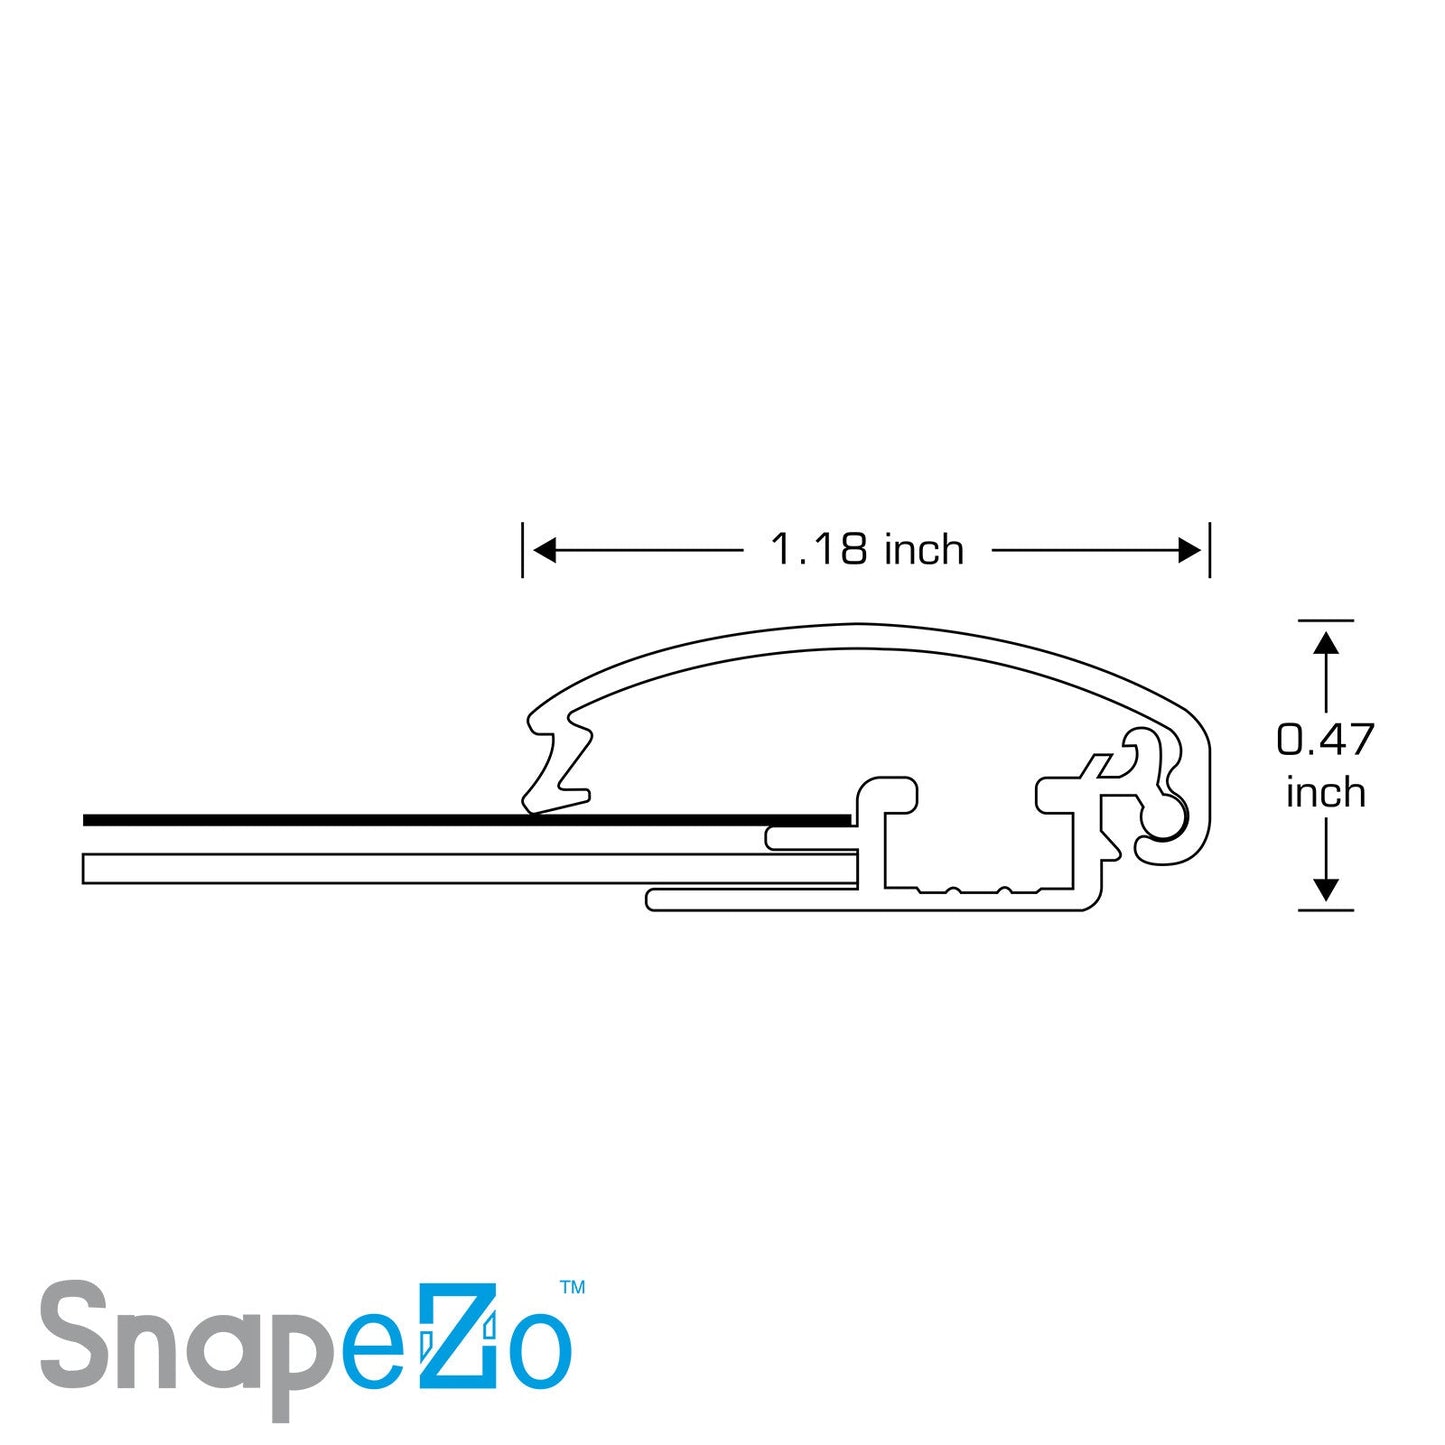 23x33 Red SnapeZo® Snap Frame - 1.2" Profile